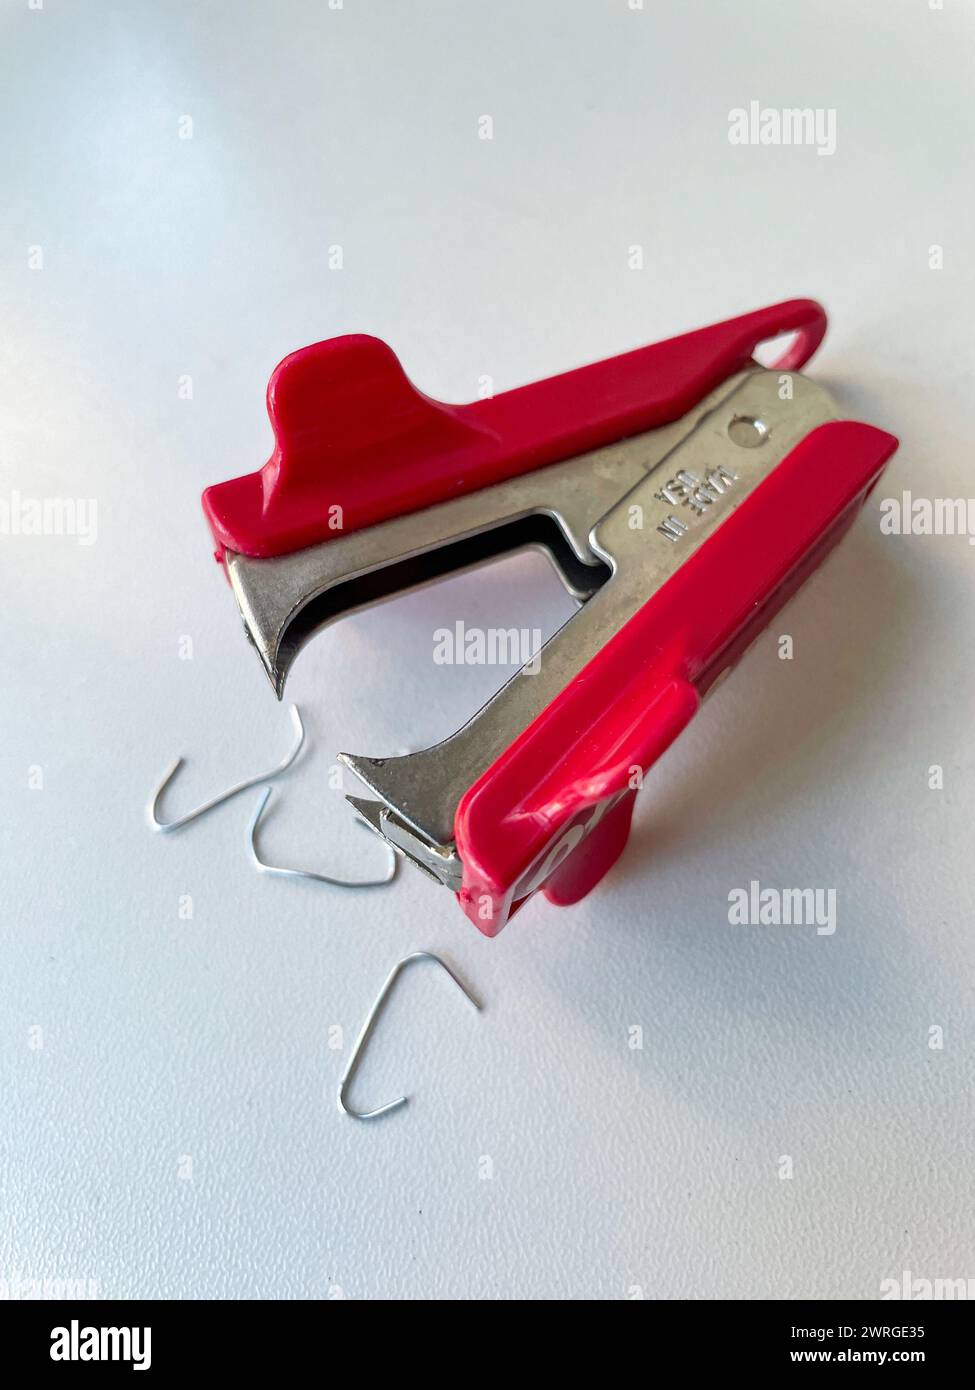 STILL Life of Staple Remover and Used Staples, USA Foto Stock